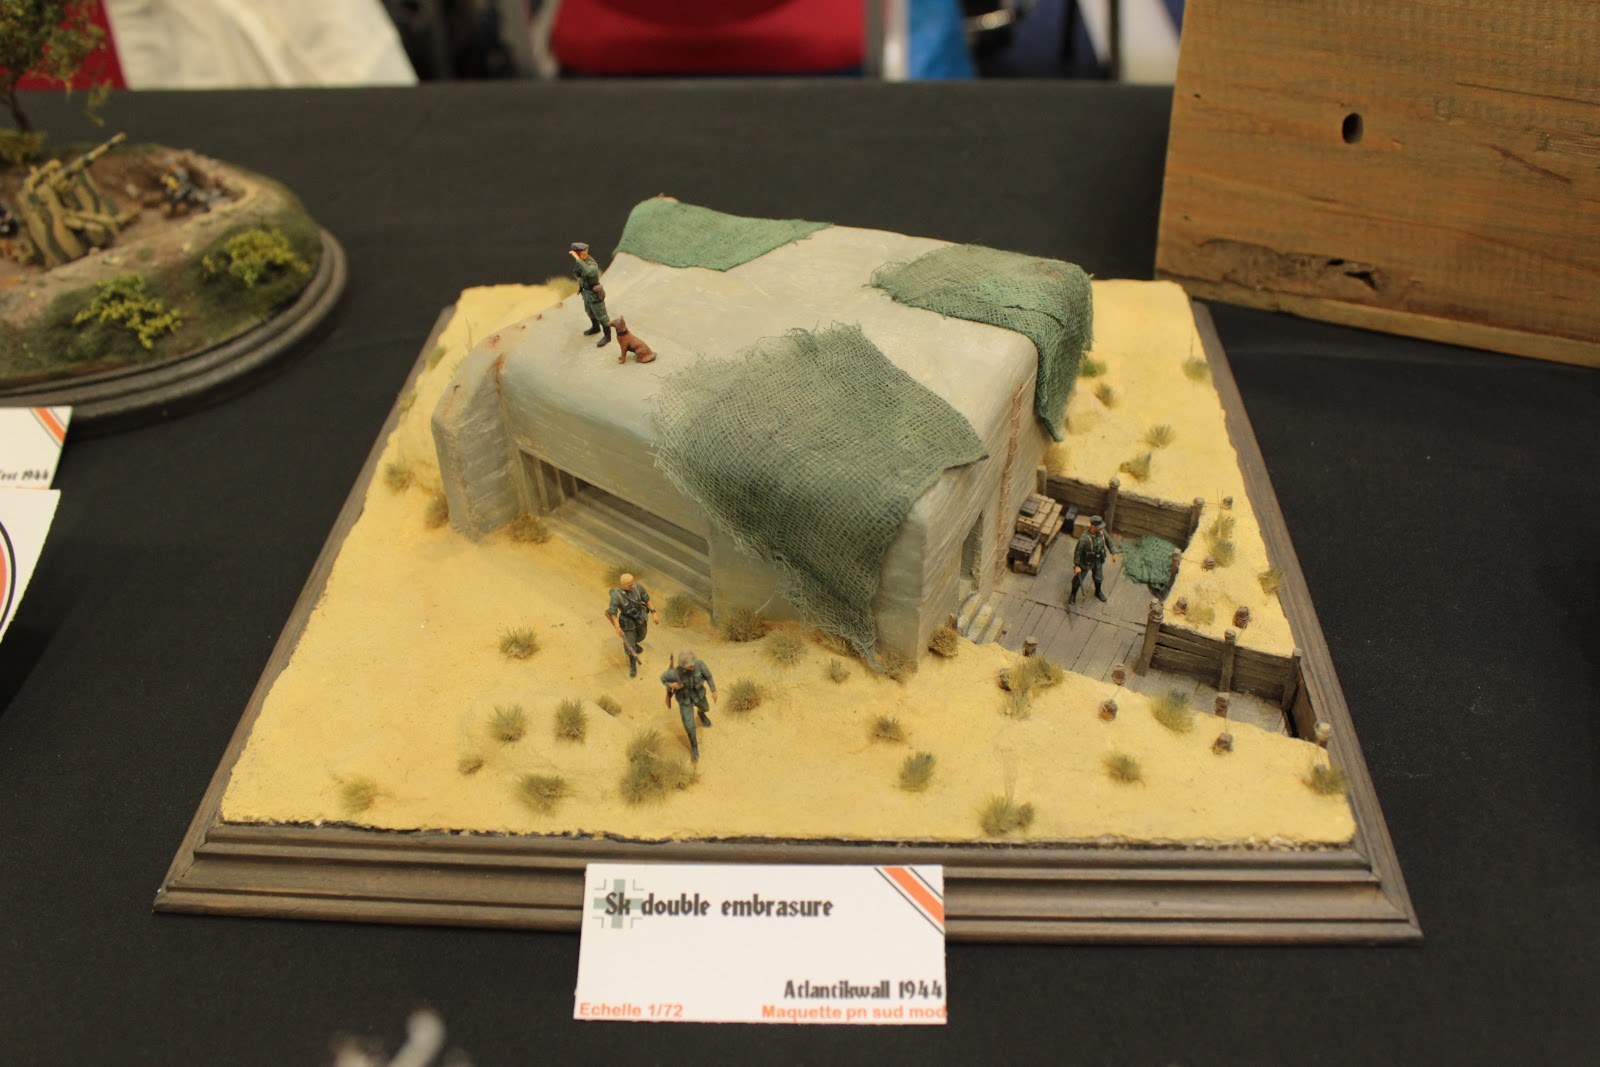 Maquettexpo 2017 14-15 octobre Hyères - Page 4 IMG_4215